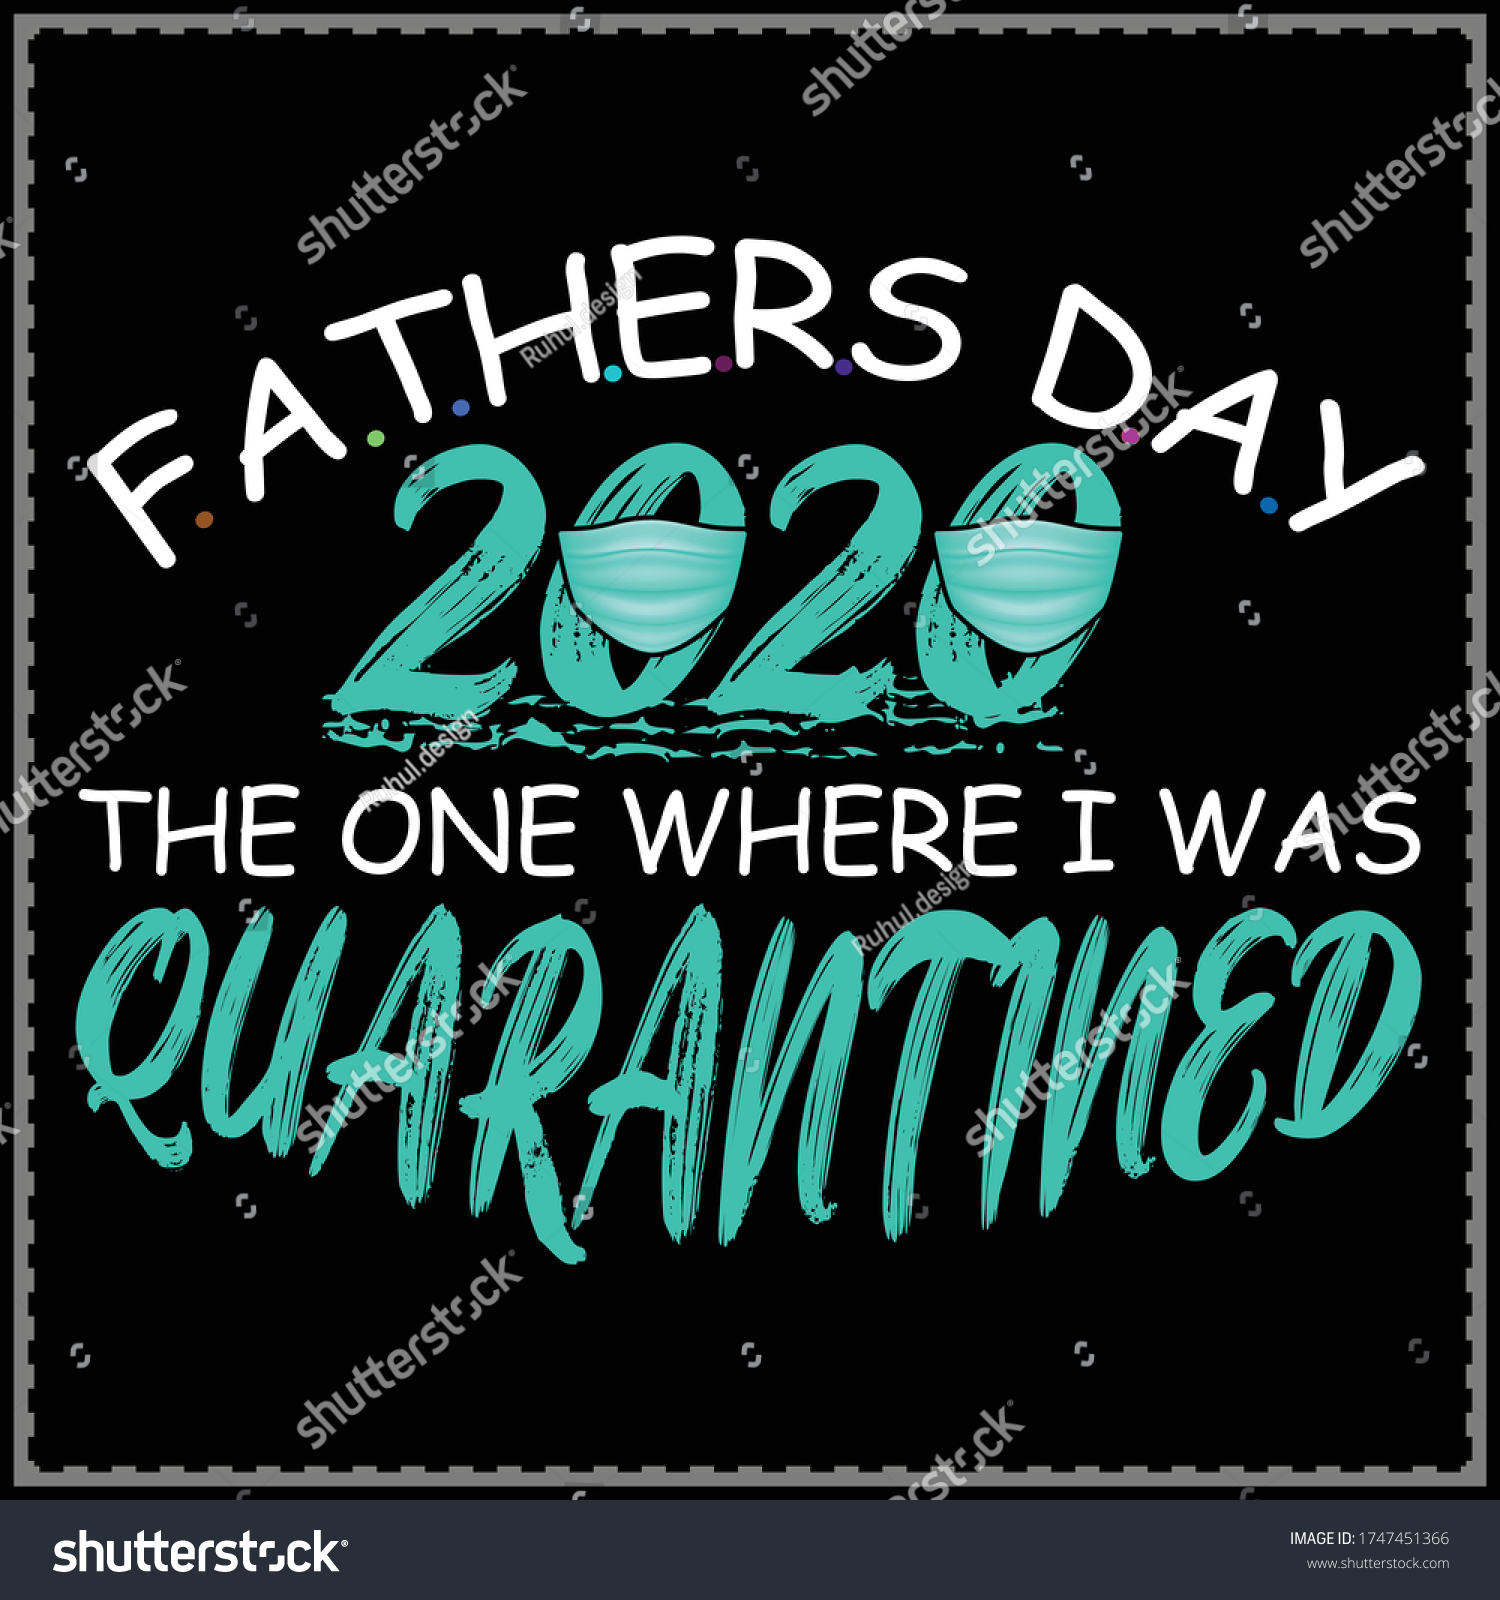 SVG of Fathers Day 2020 The One Where They Were Quarantined - Fathers Day 2020 Quarantined - Fathers Day 2020 T-Shirt, COVID 19 SVG t-shirt design png svg